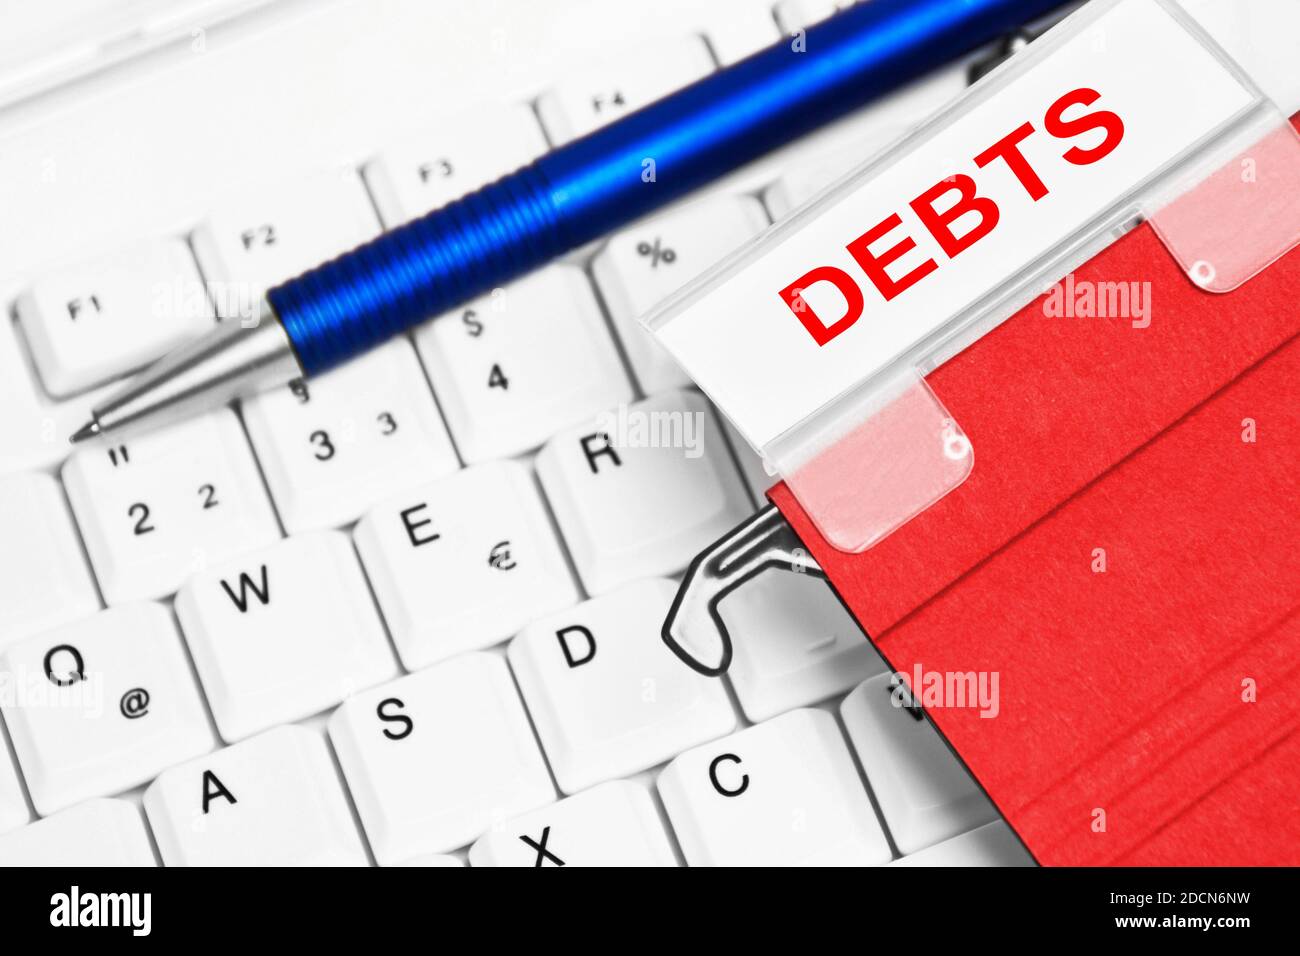 Debts red folder and white PC keyboard Stock Photo